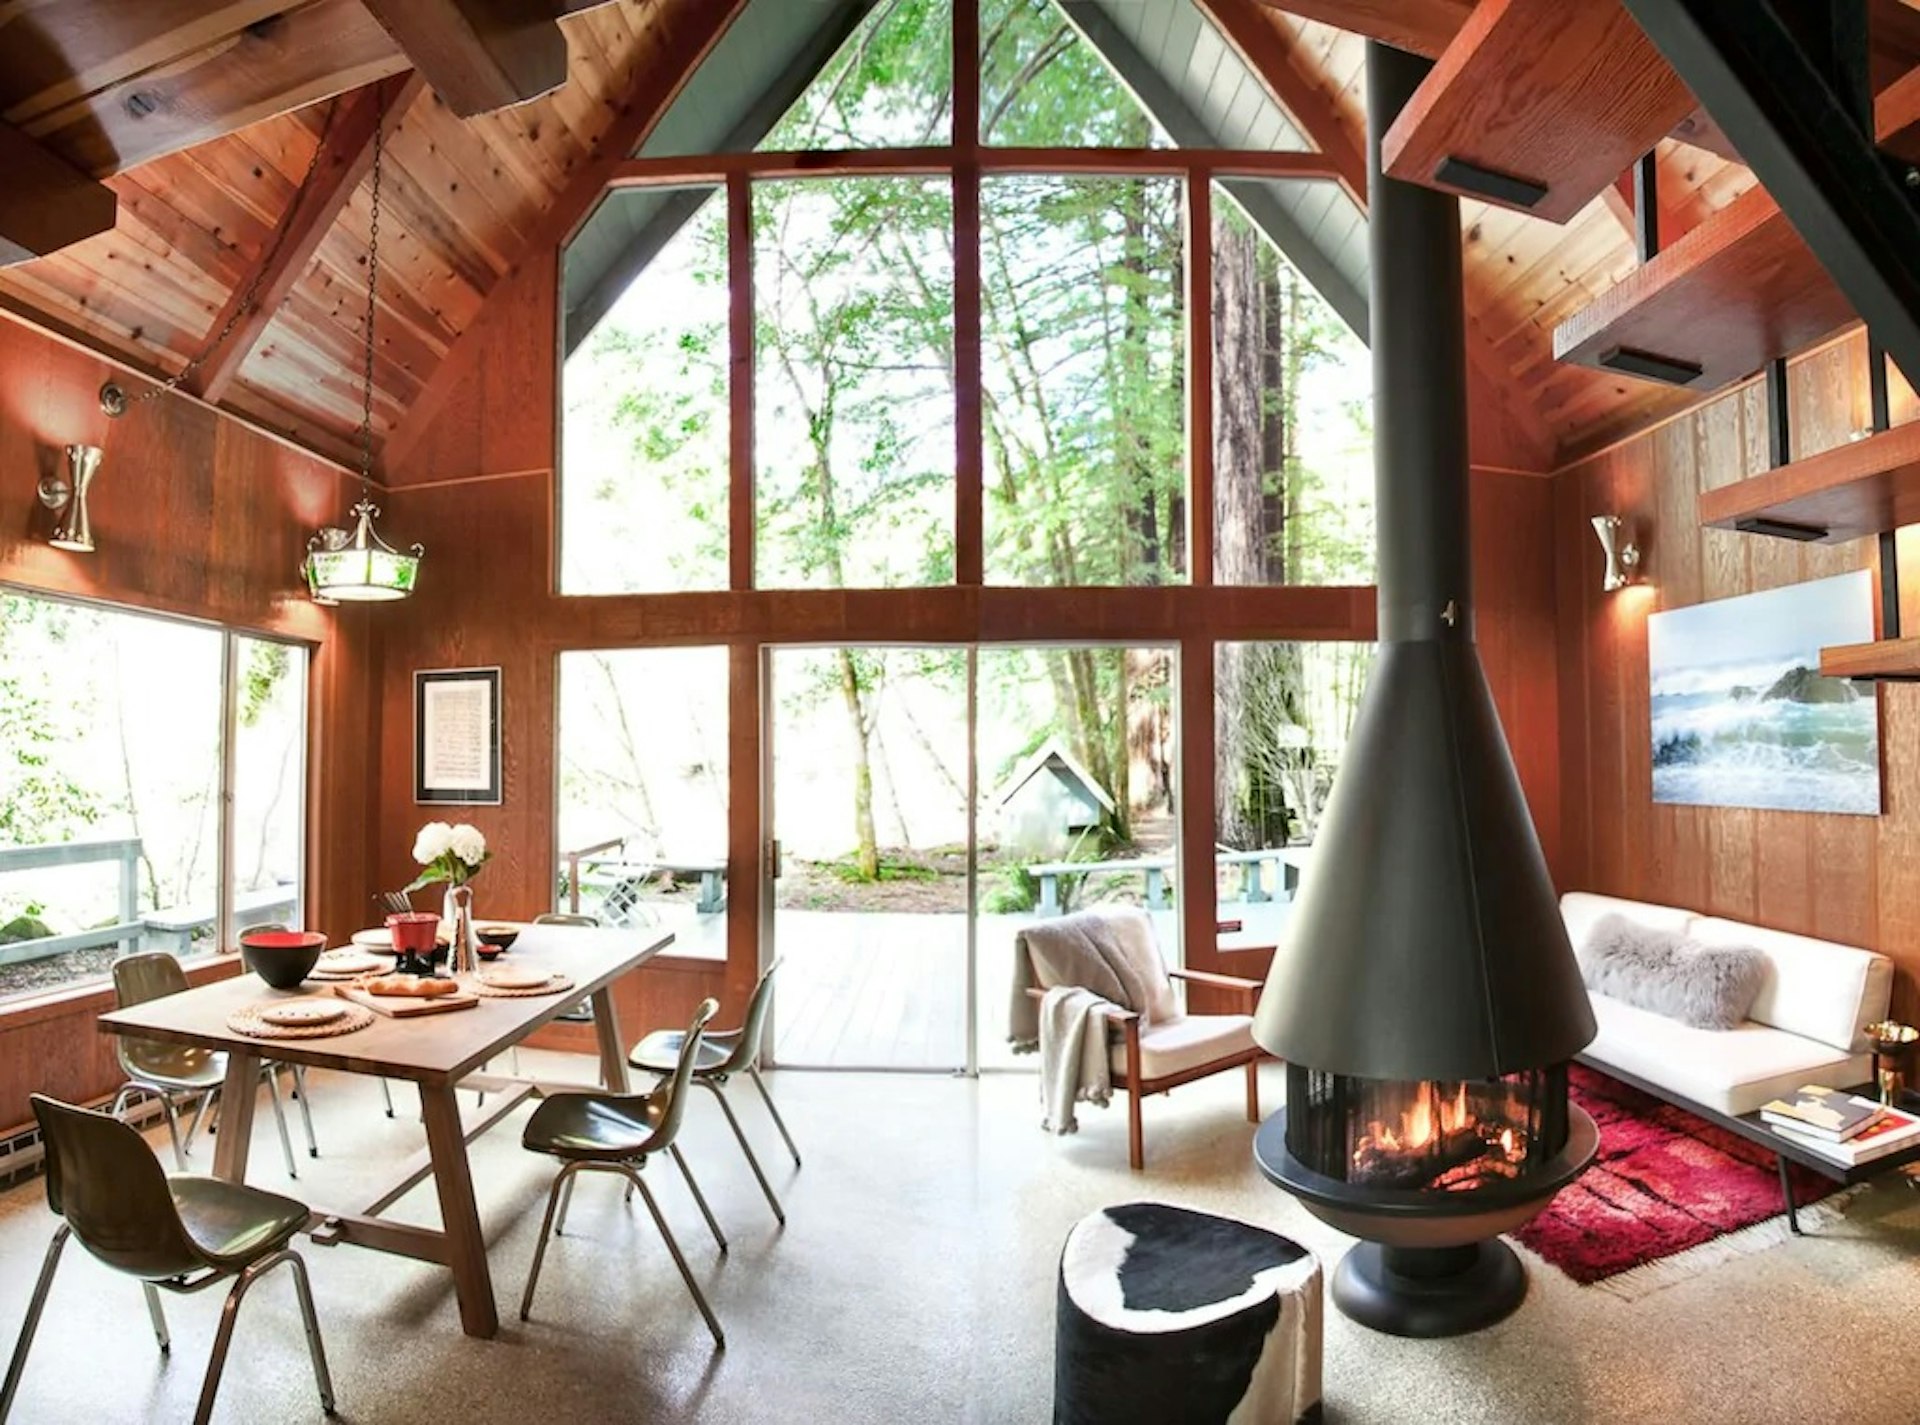 A wood-paneled cabin with a midcentury modern dining table and fireplace